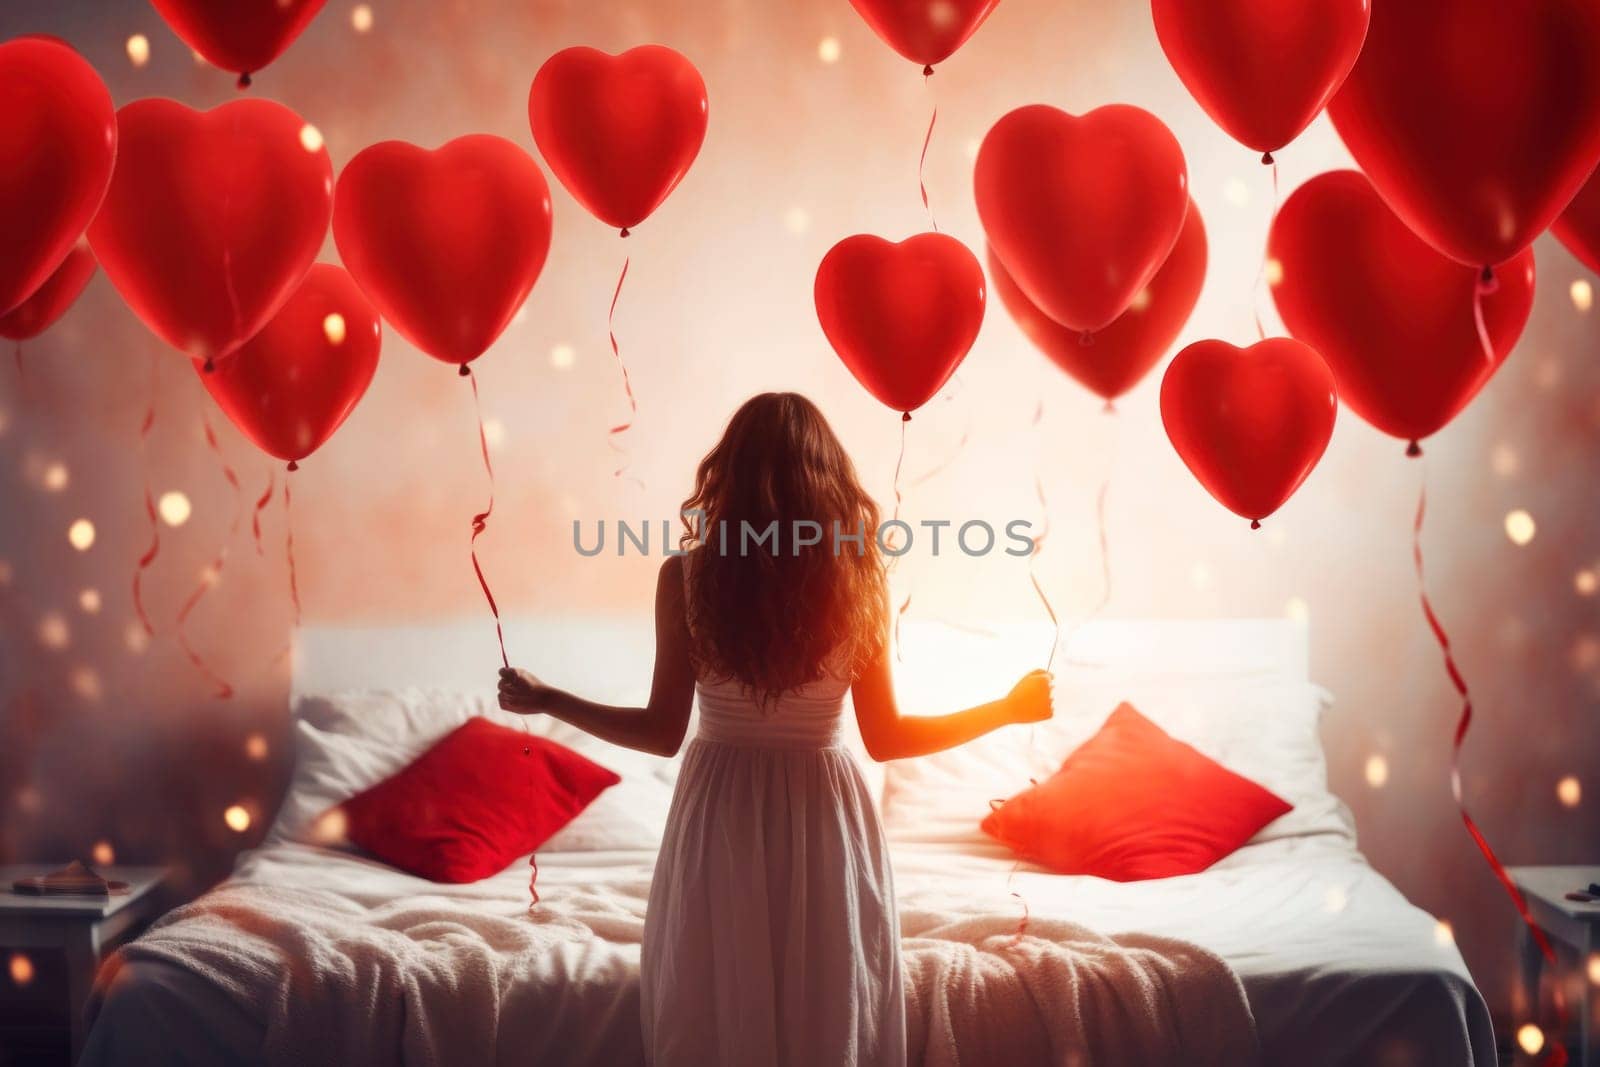 A happy woman enjoys a love-filled moment in bedroom with heart-shaped balloons by andreyz